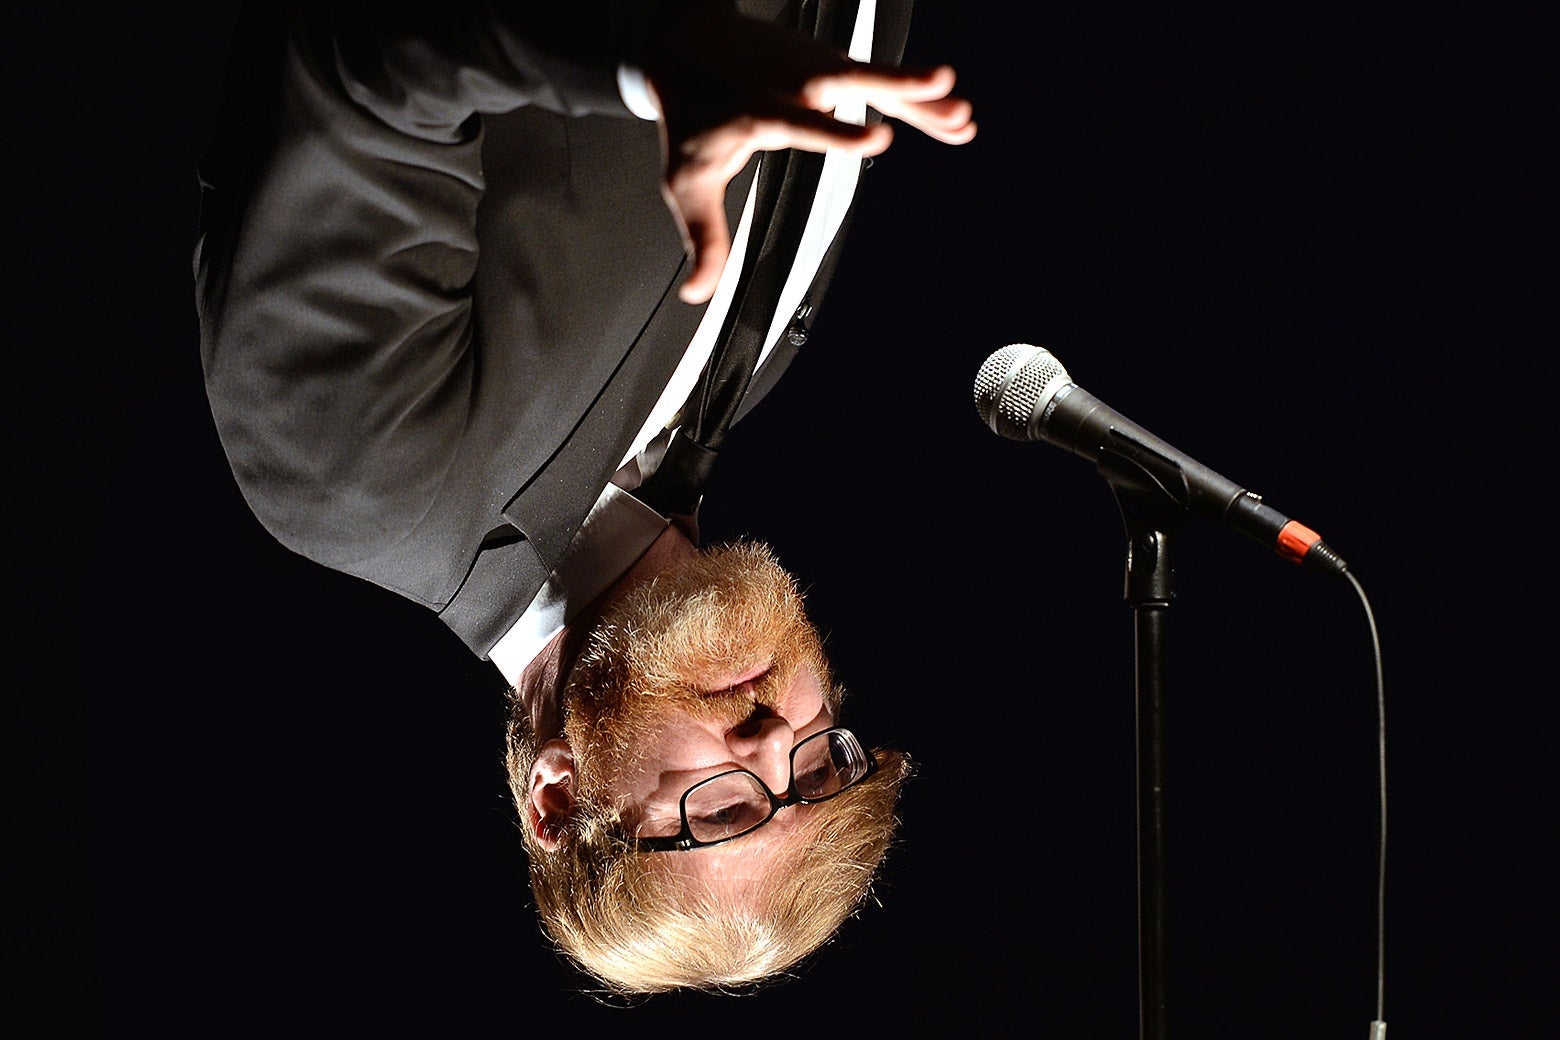 Klosterman photoshopped upside-down speaking at a mic